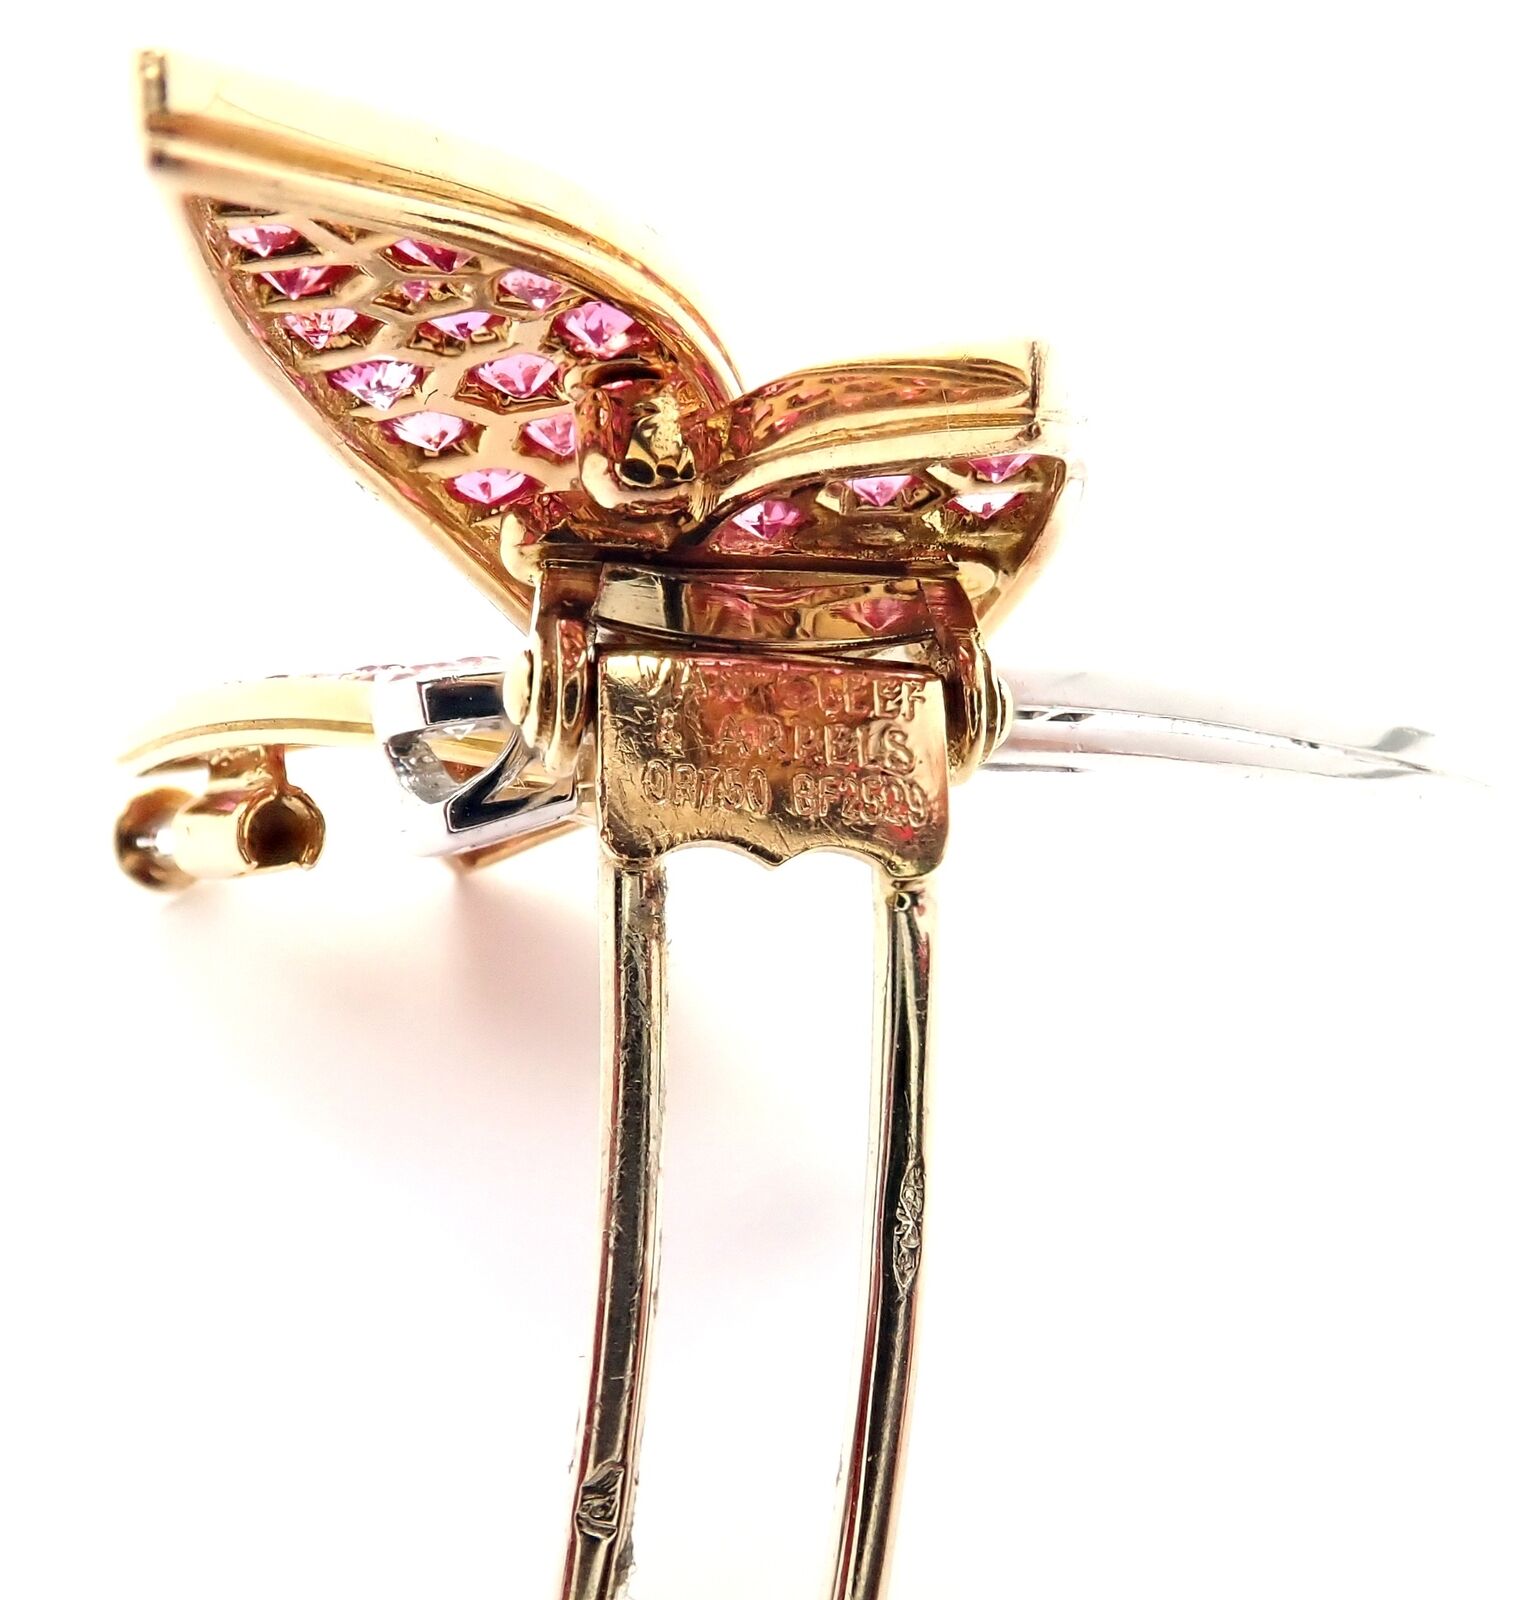 Van Cleef & Arpels Jewelry & Watches:Fine Jewelry:Brooches & Pins Authentic Van Cleef & Arpels Dragonfly 18k Gold Diamond Pink Sapphire Pin Brooch